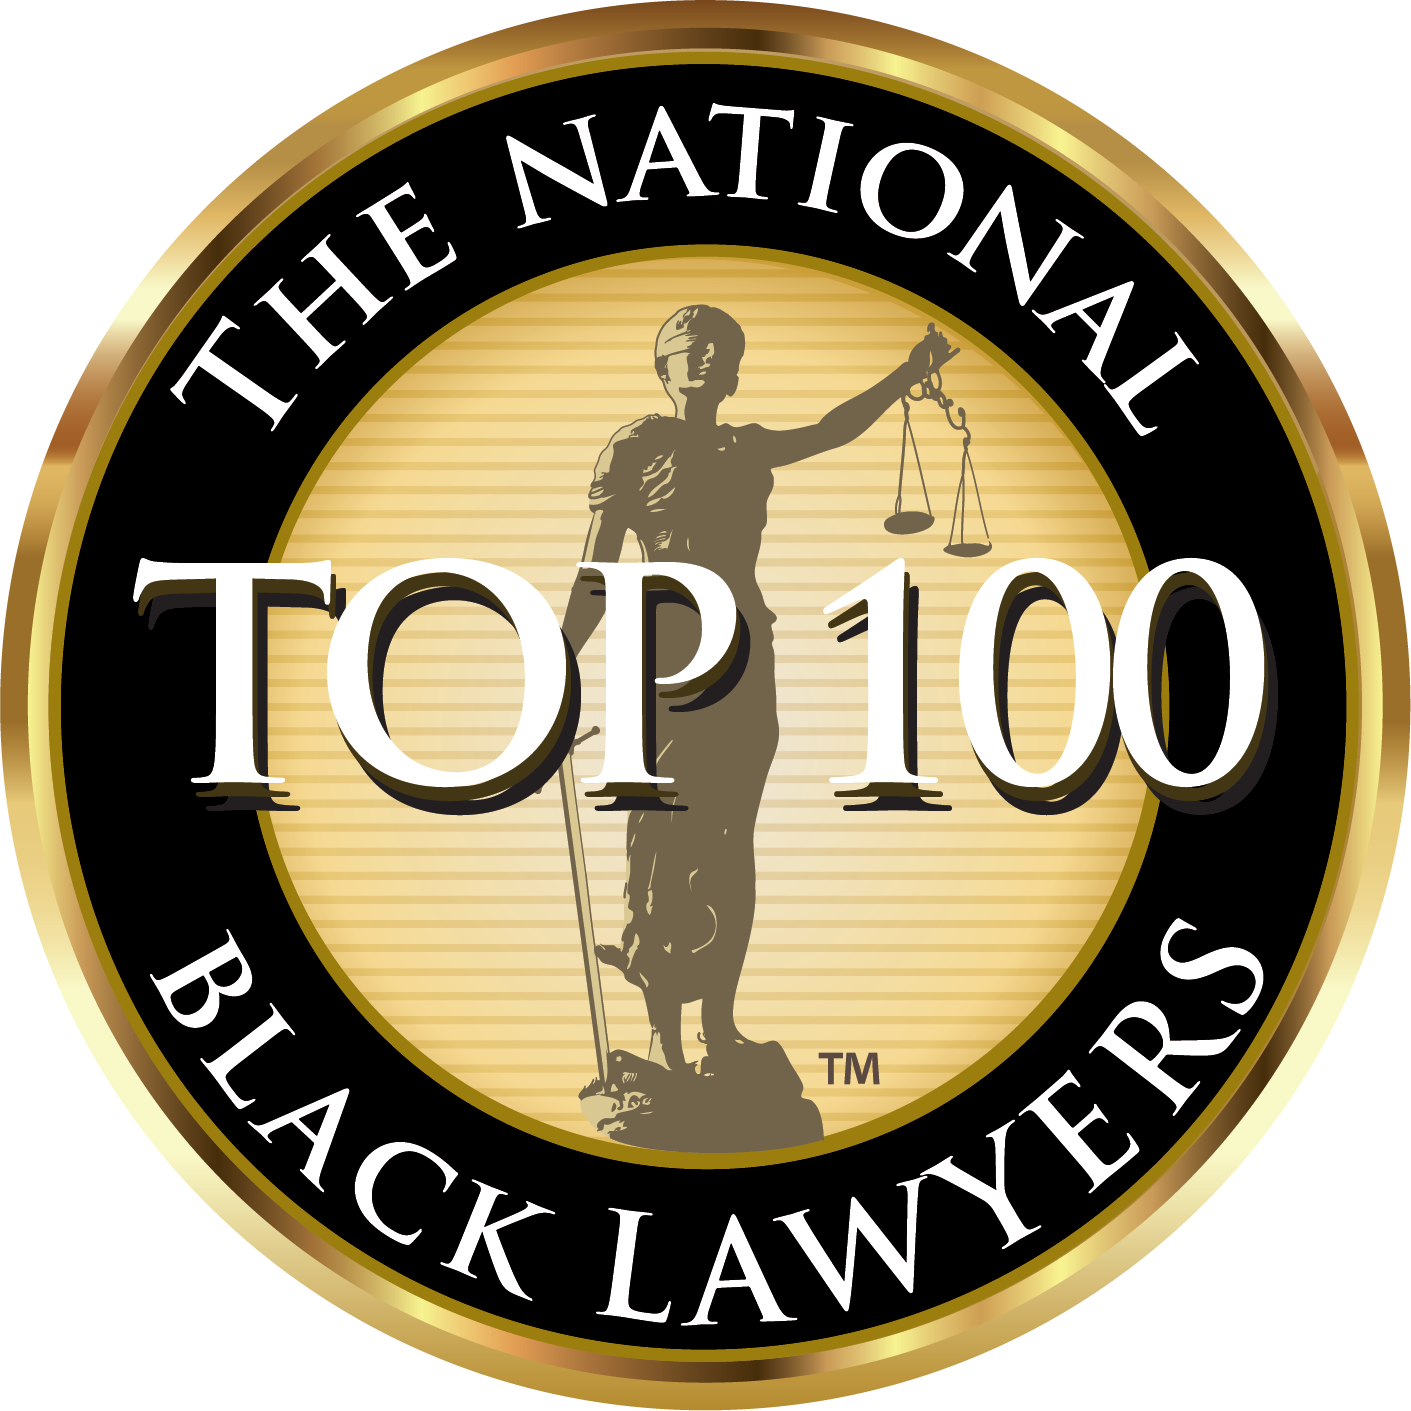 Robert Moody Selected for Membership Into The National Black Lawyers Top 100